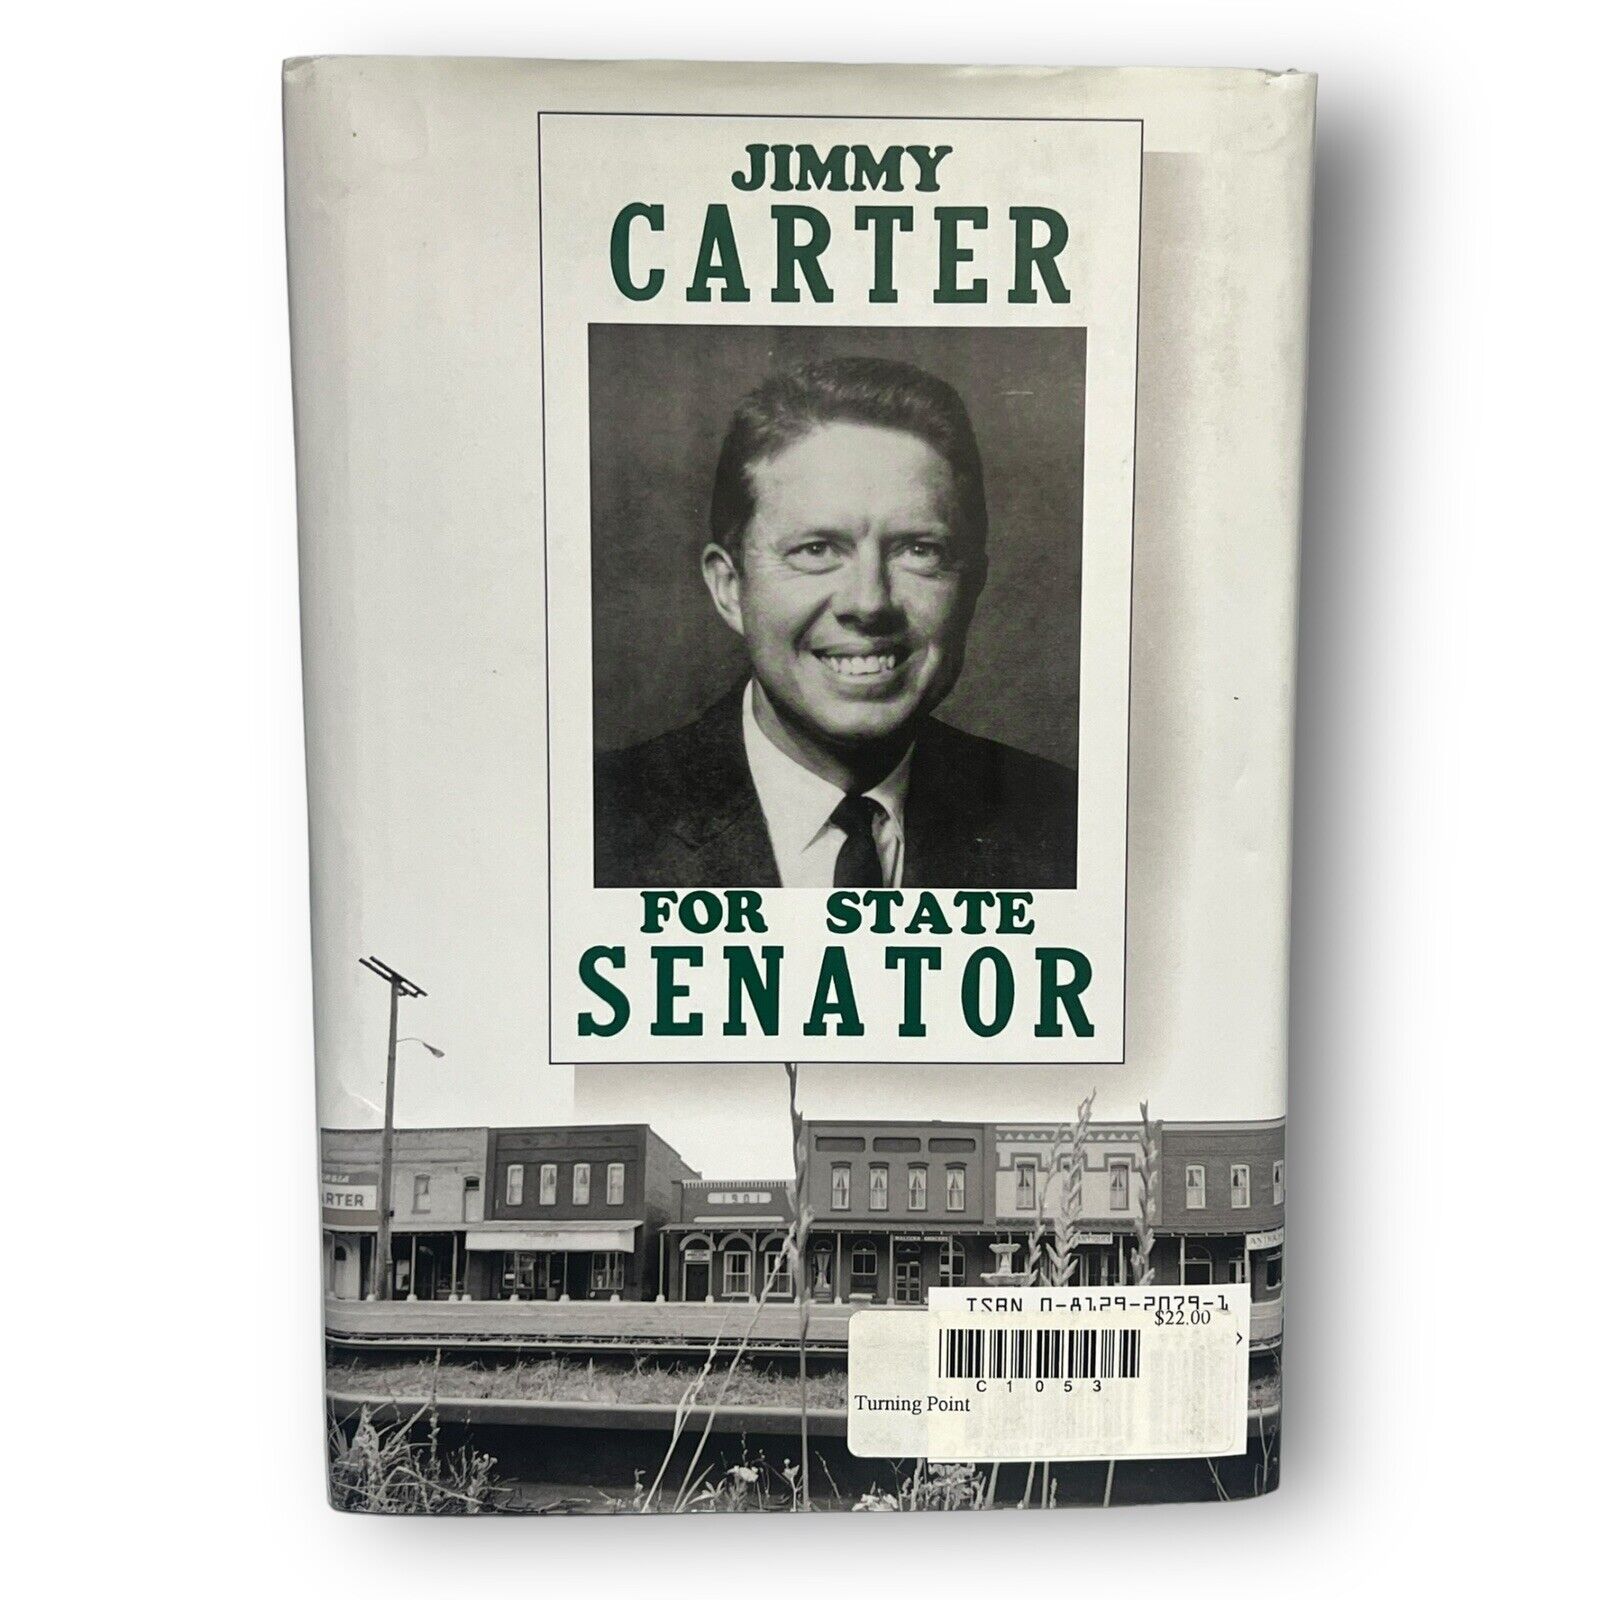 Jimmy Carter Turning Point Book Signed Autographed Copy (Hardcover, 1992)